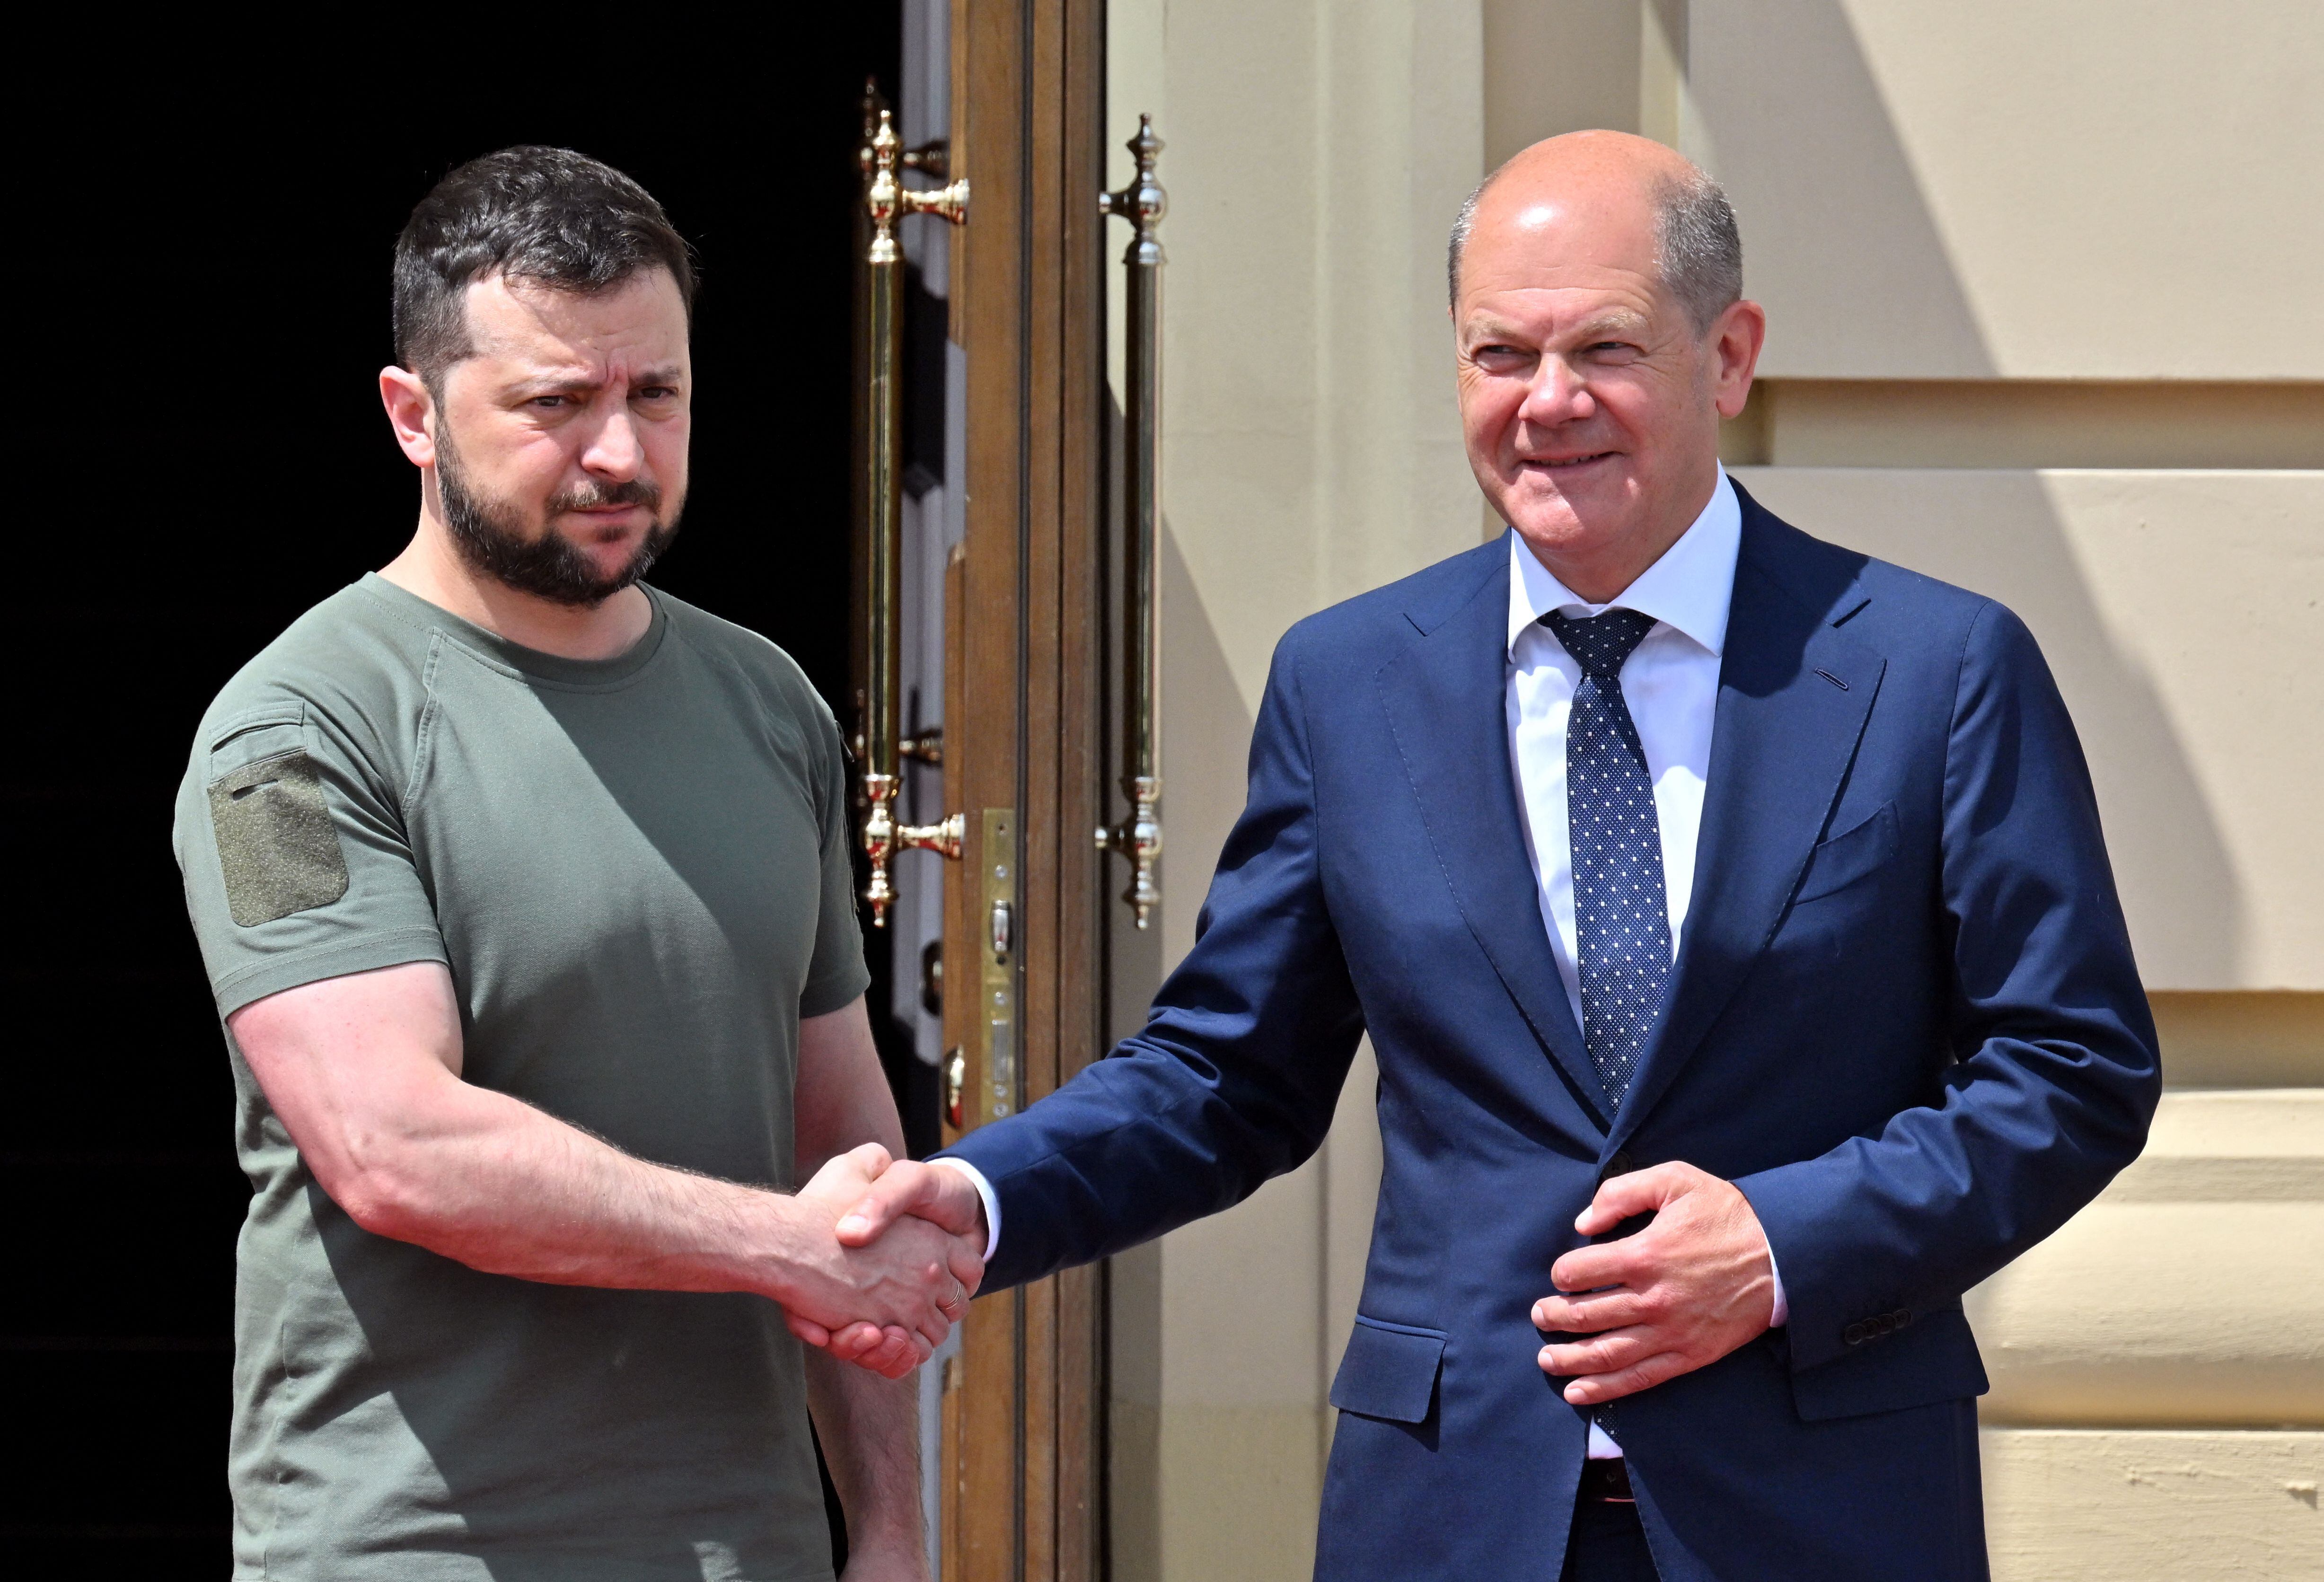 Last June, the President of Ukraine, Volodymyr Zelensky, received the German Chancellor, Olaf Scholz, in kyiv.  (Photo by Sergei SUPINSKY / AFP)